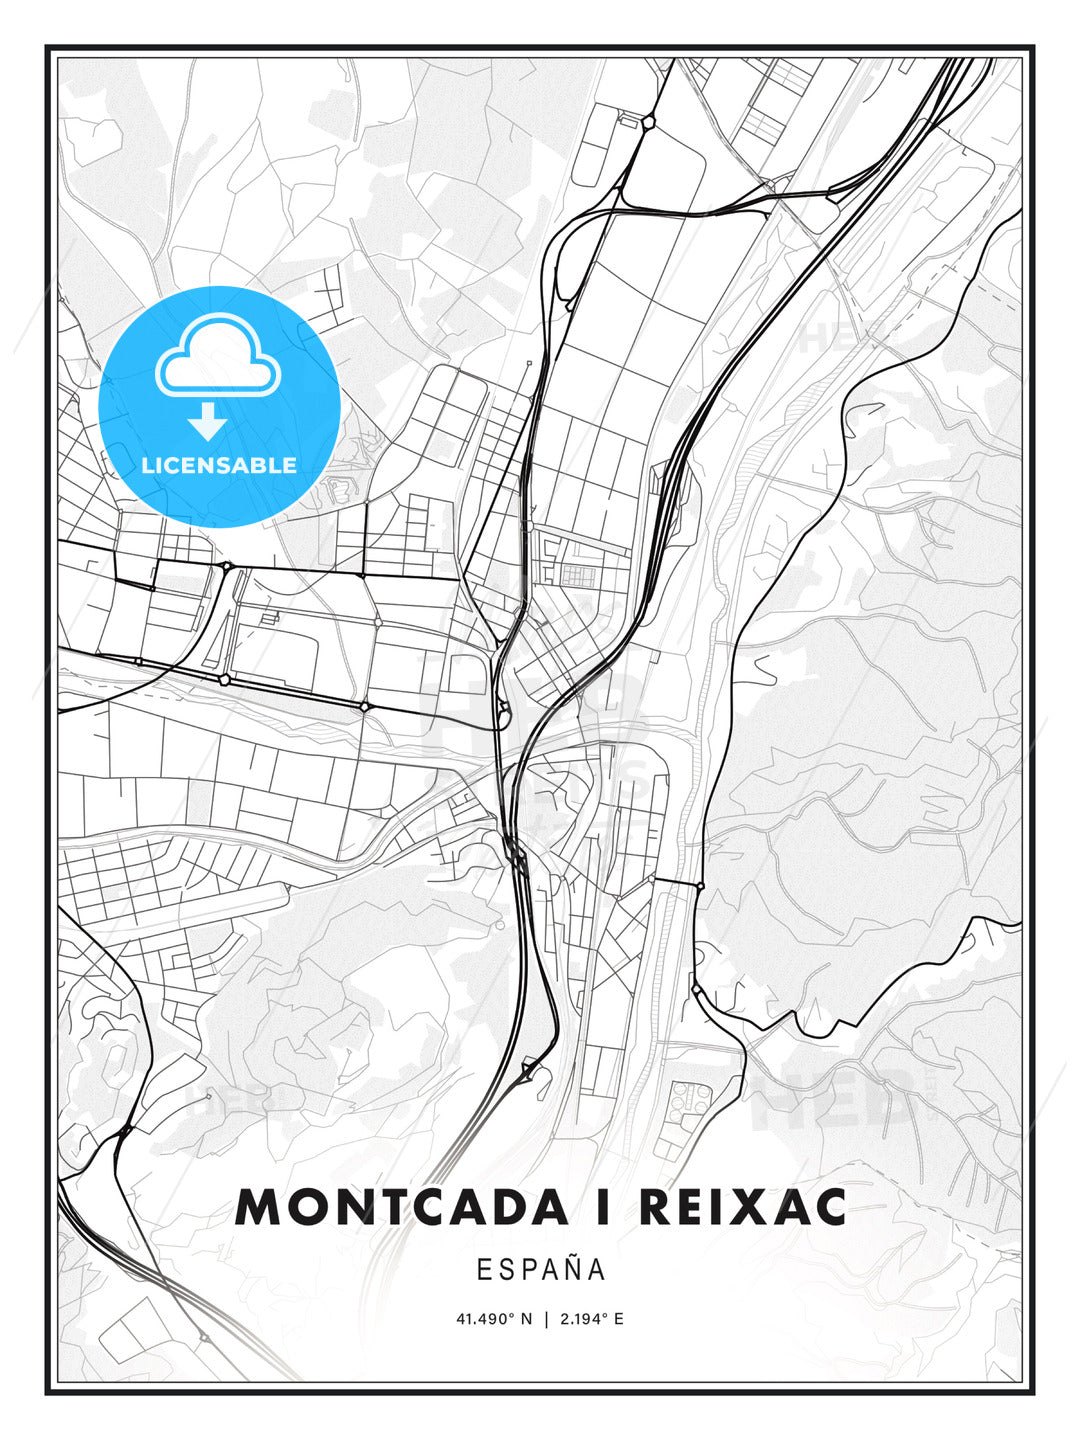 Montcada i Reixac, Spain, Modern Print Template in Various Formats - HEBSTREITS Sketches